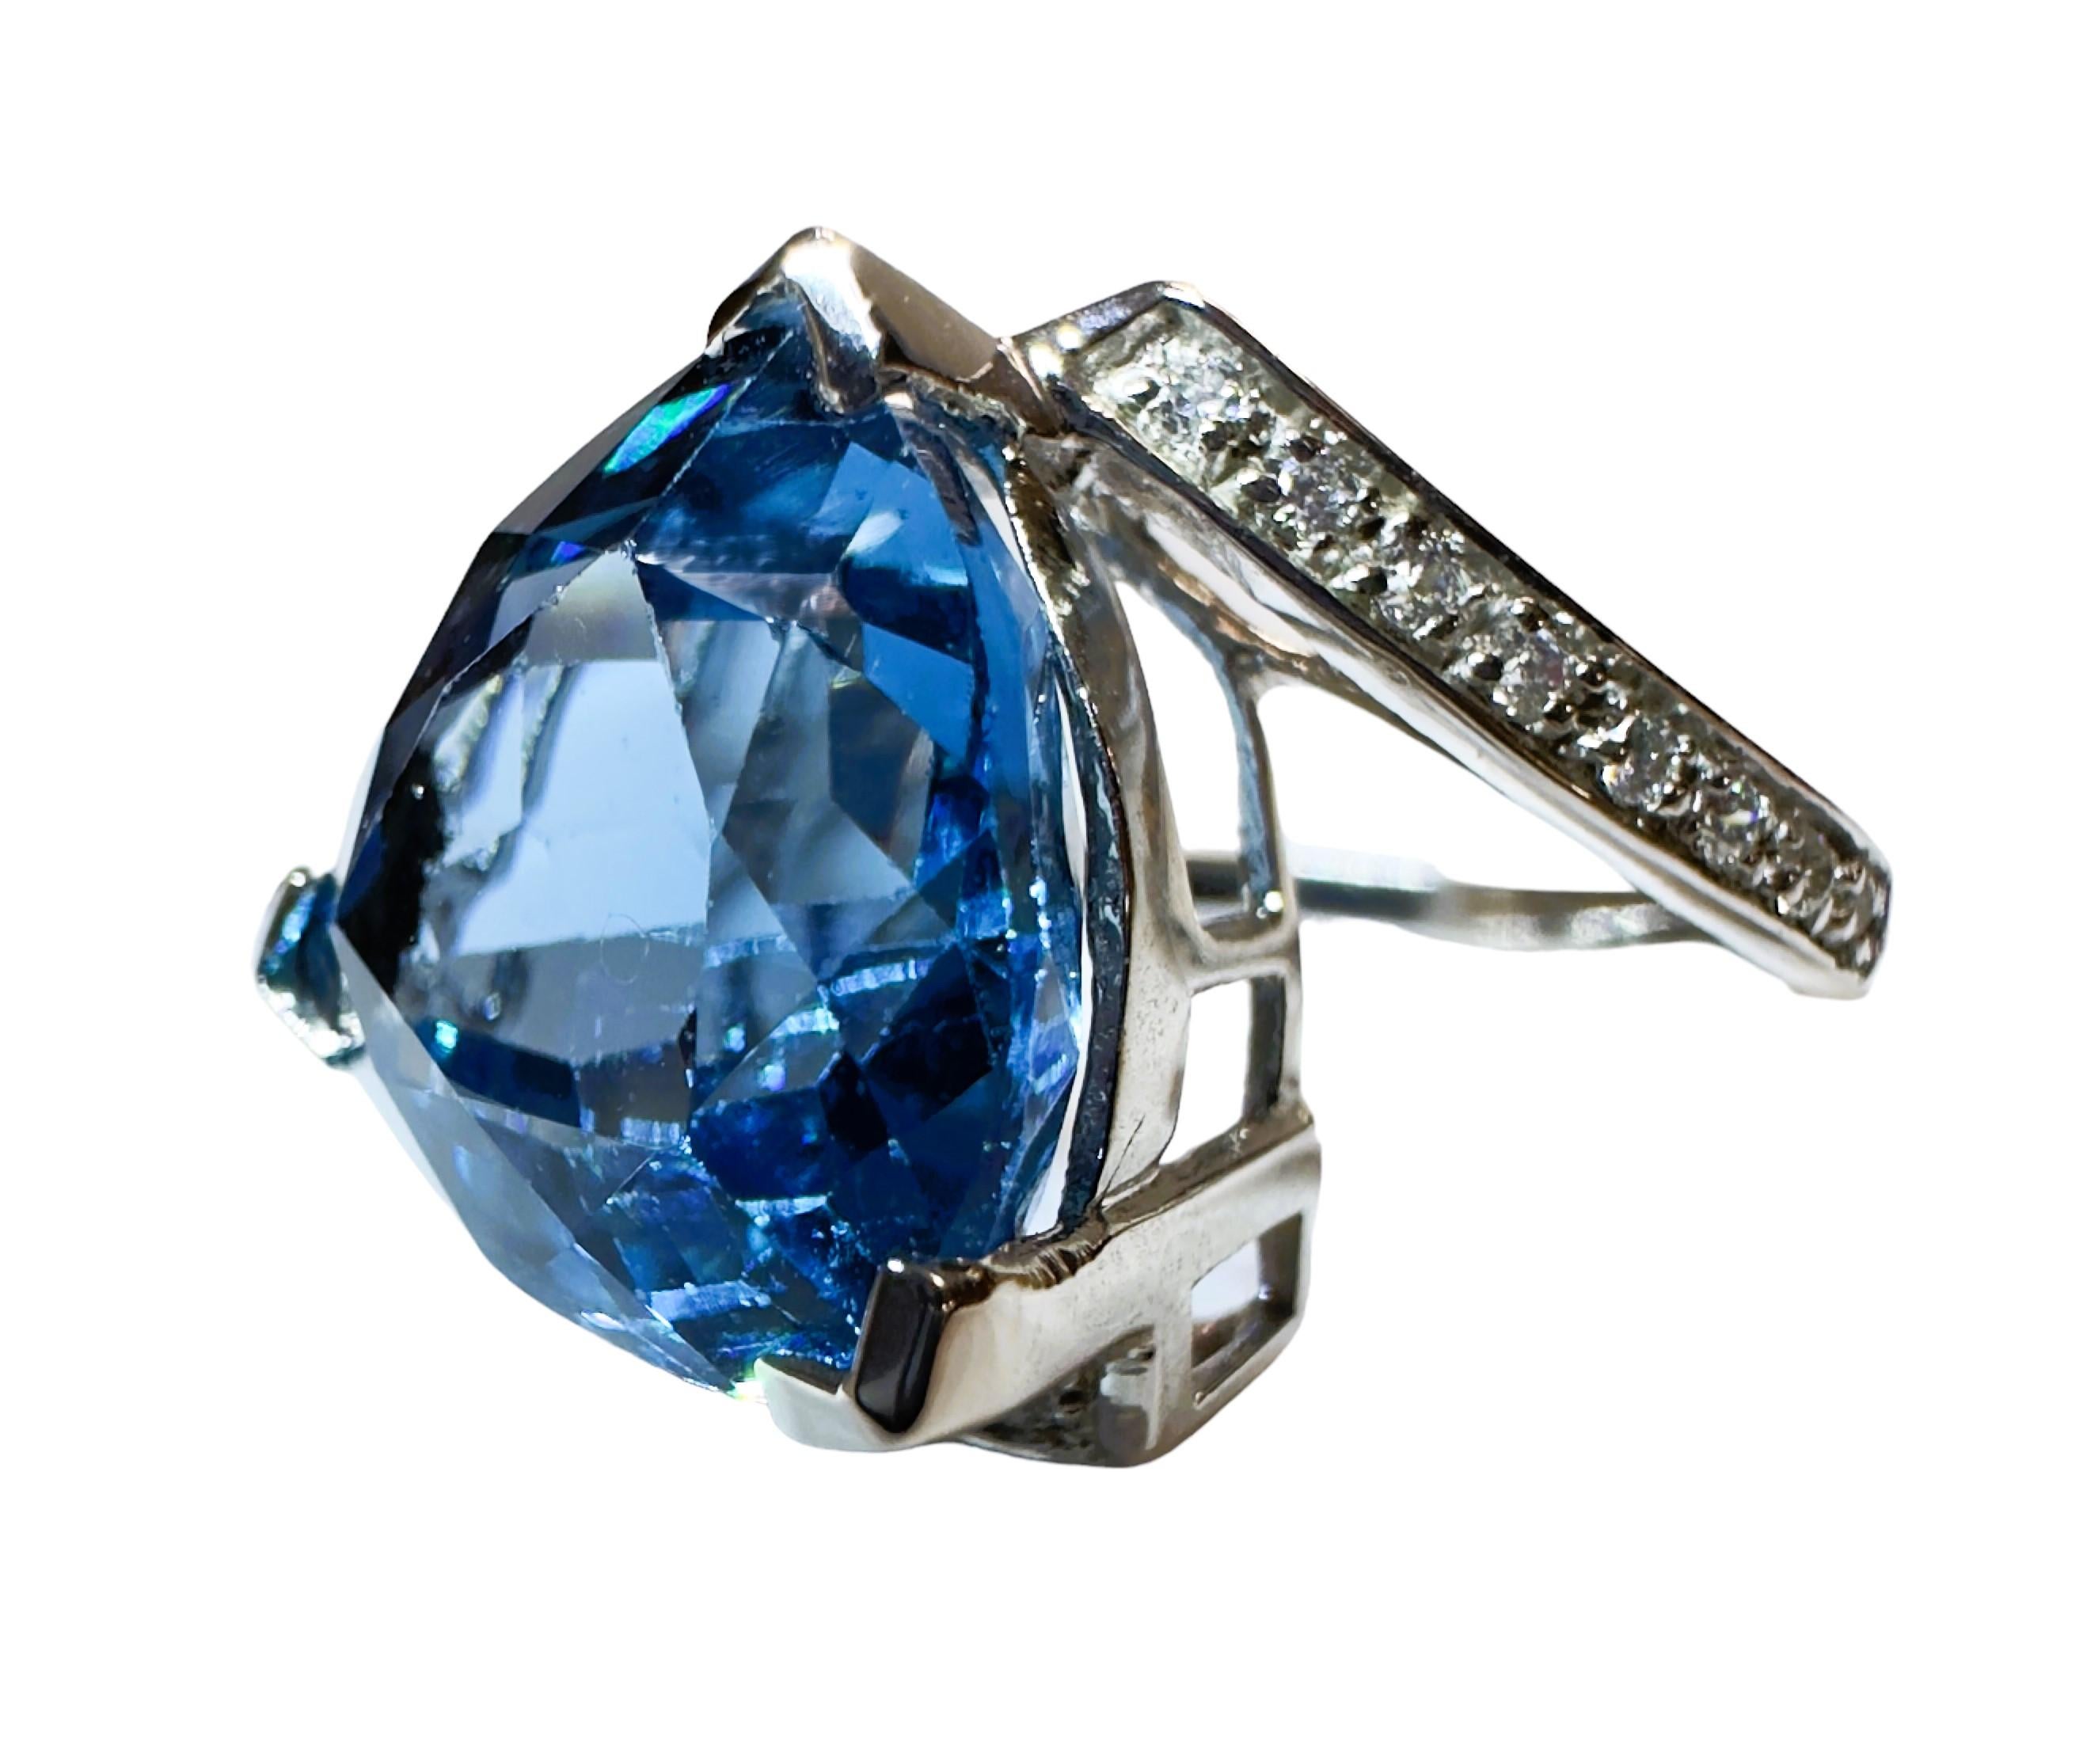 Women's New African 10.6 Ct Swiss Blue Topaz & White Sapphire Sterling Ring For Sale